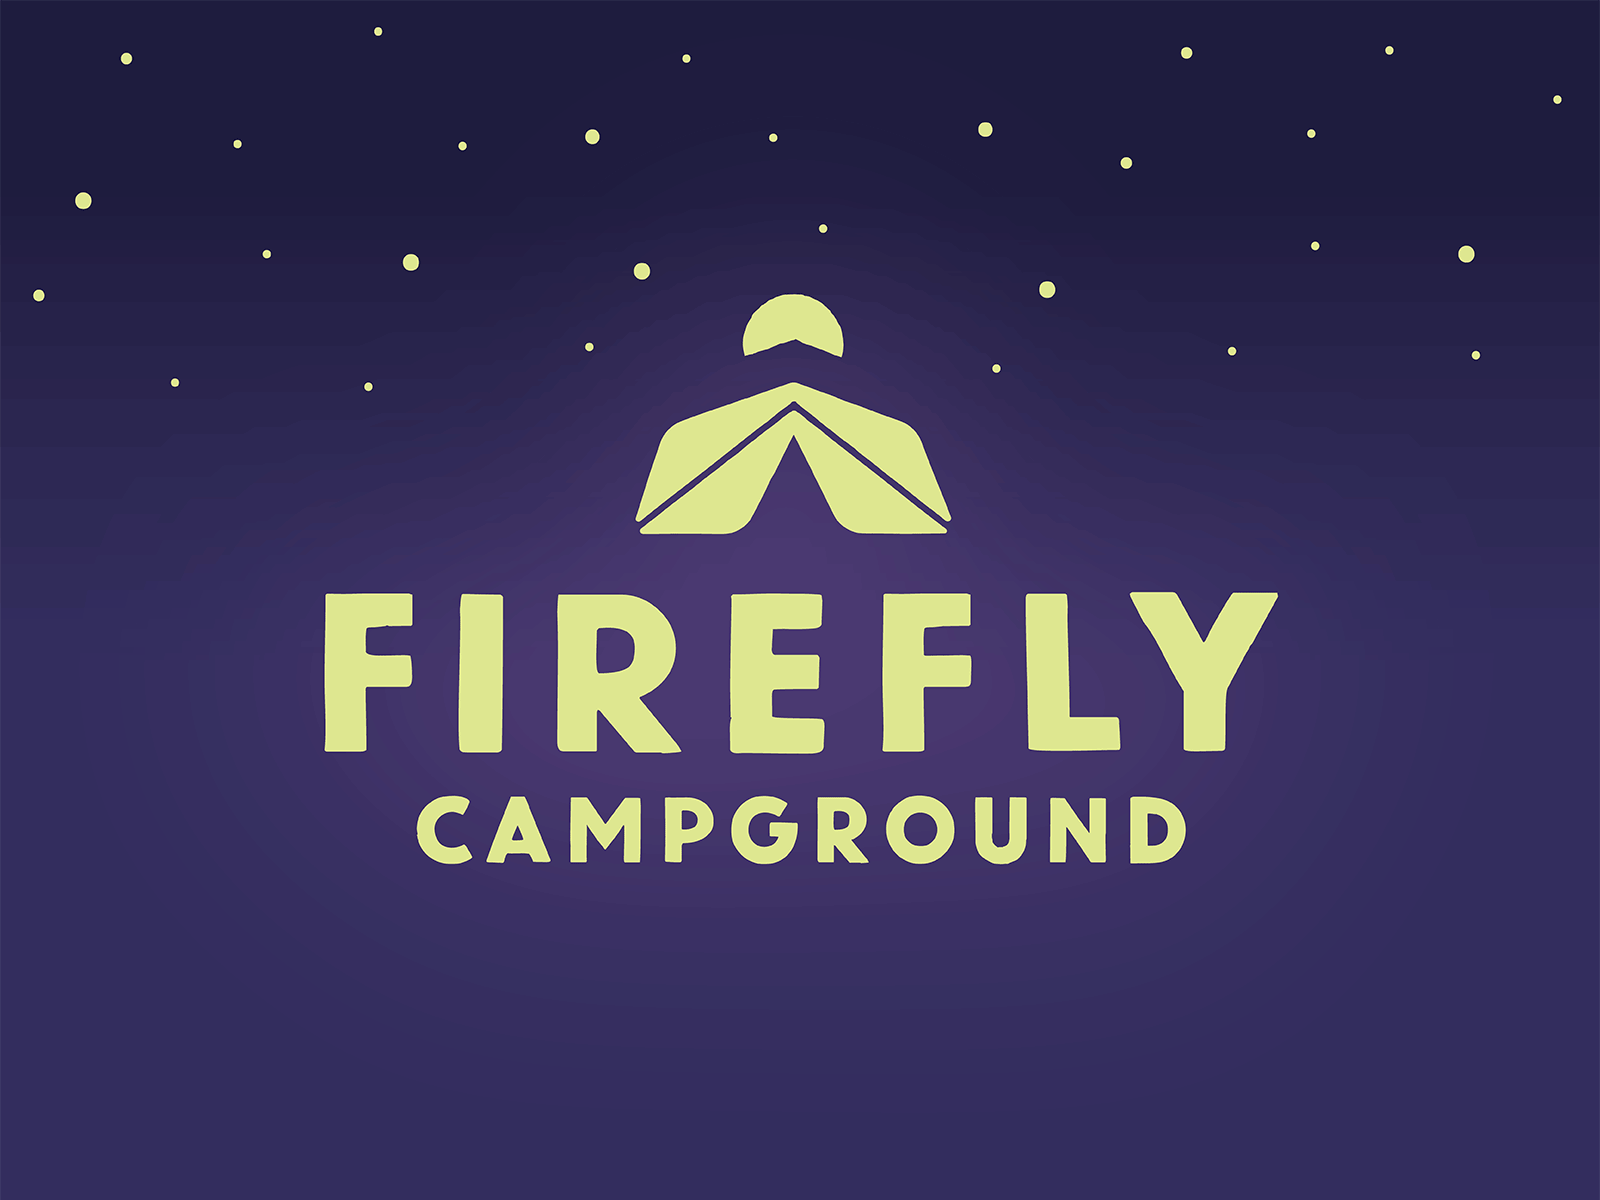 Firefly Campground logo by Chris Giorgio on Dribbble